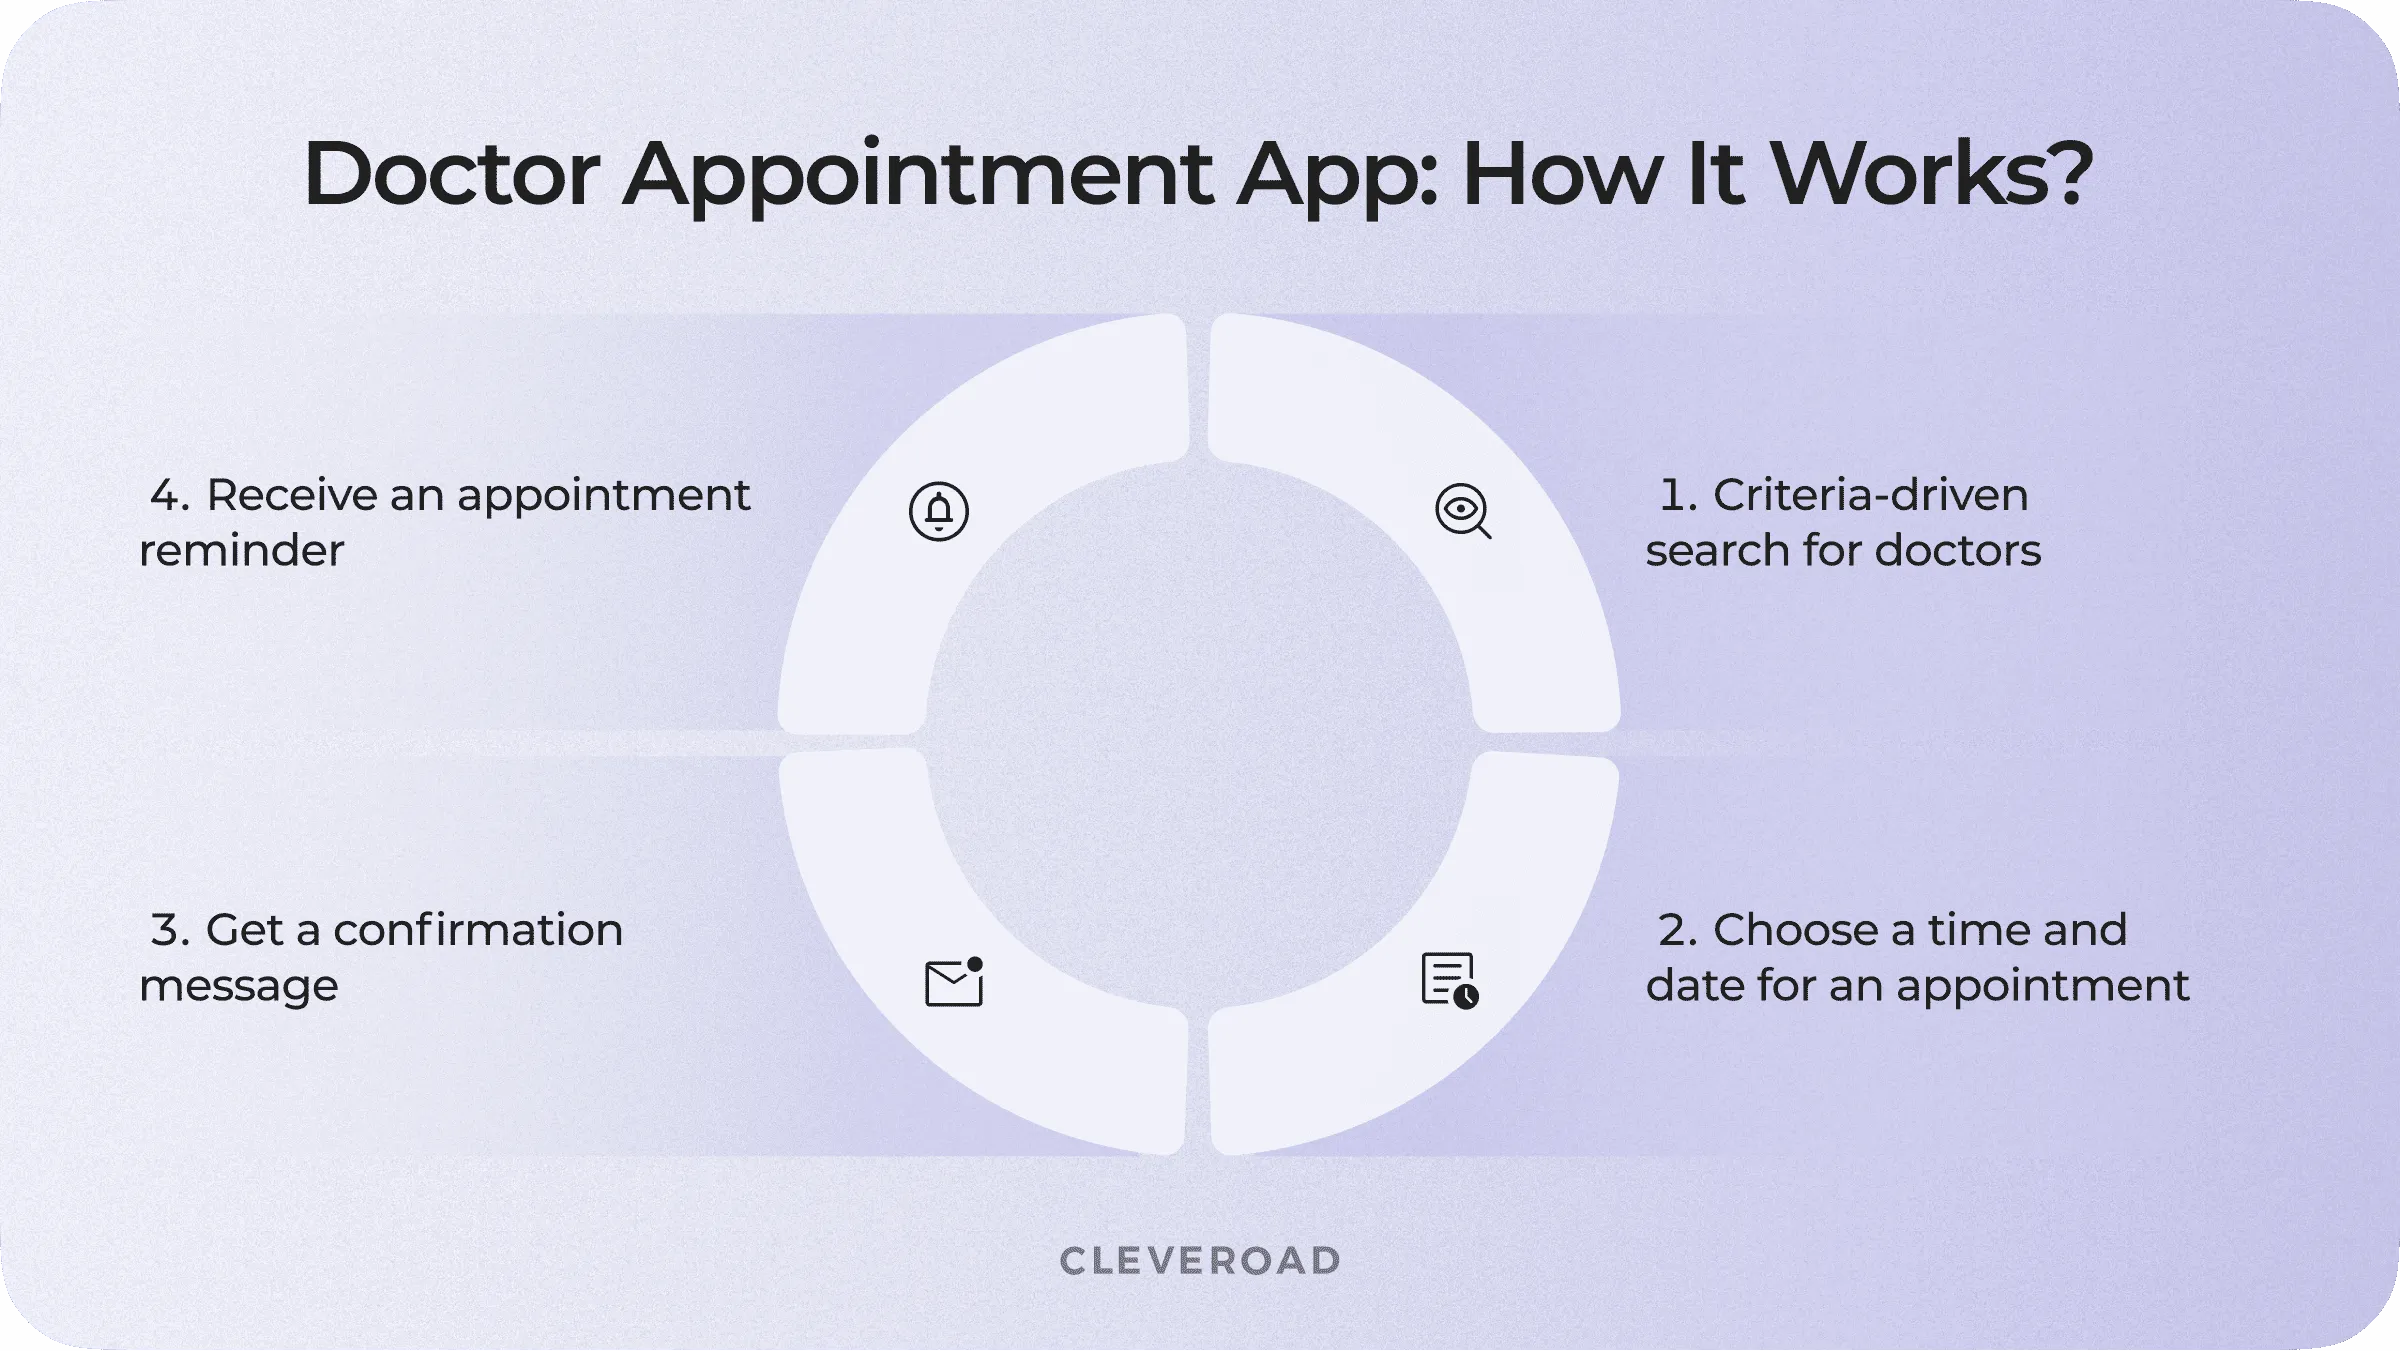 The functioning process of the doctor appointment app